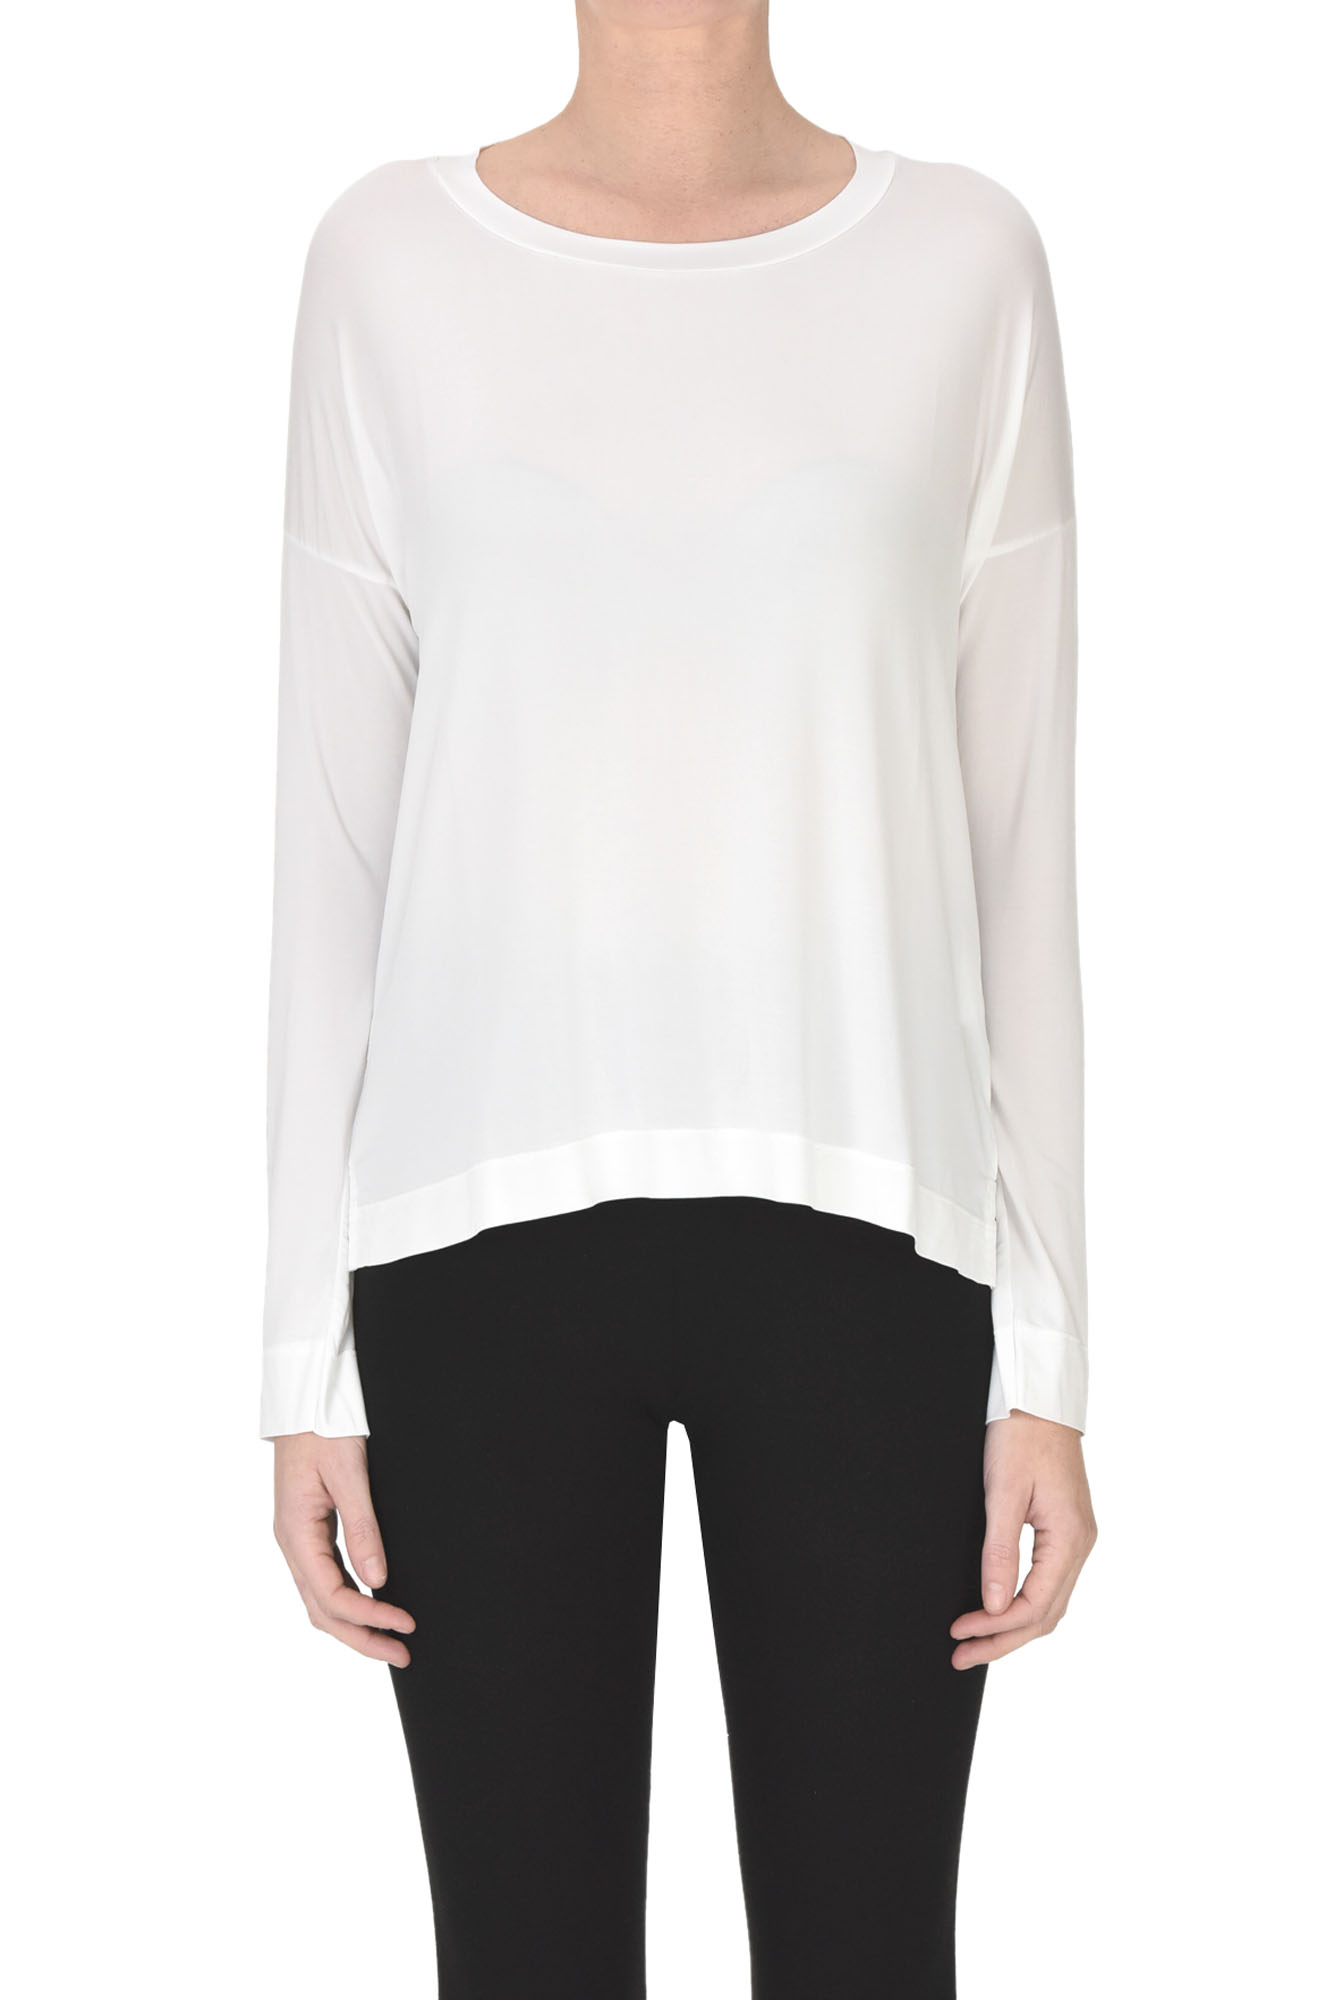 Shop Wool & Co Long Sleeves Cupro T-shirt In White